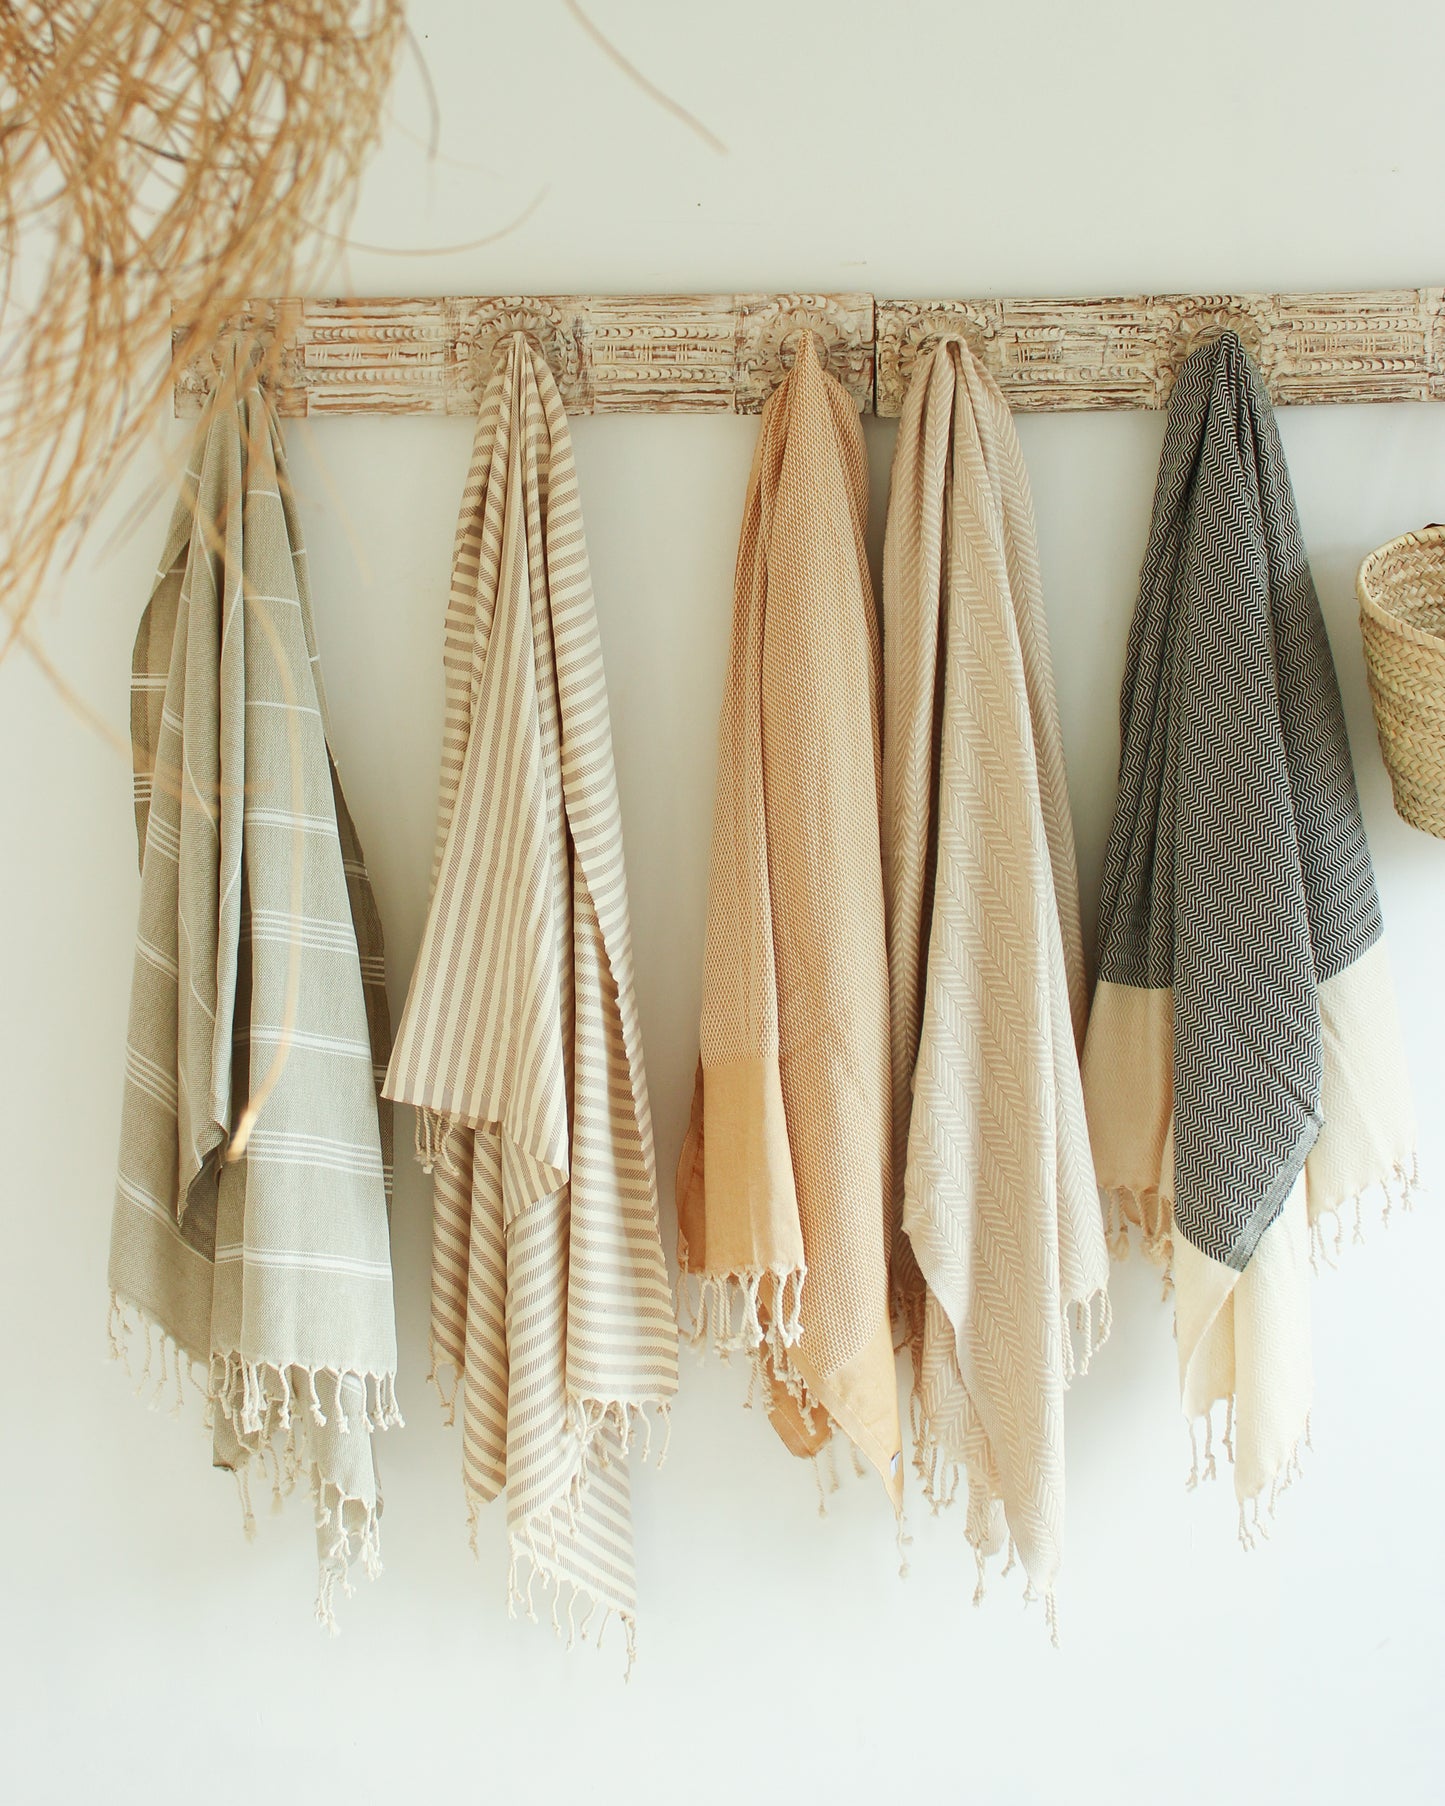 PALM Turkish Towel // Natural with Beige Stripes